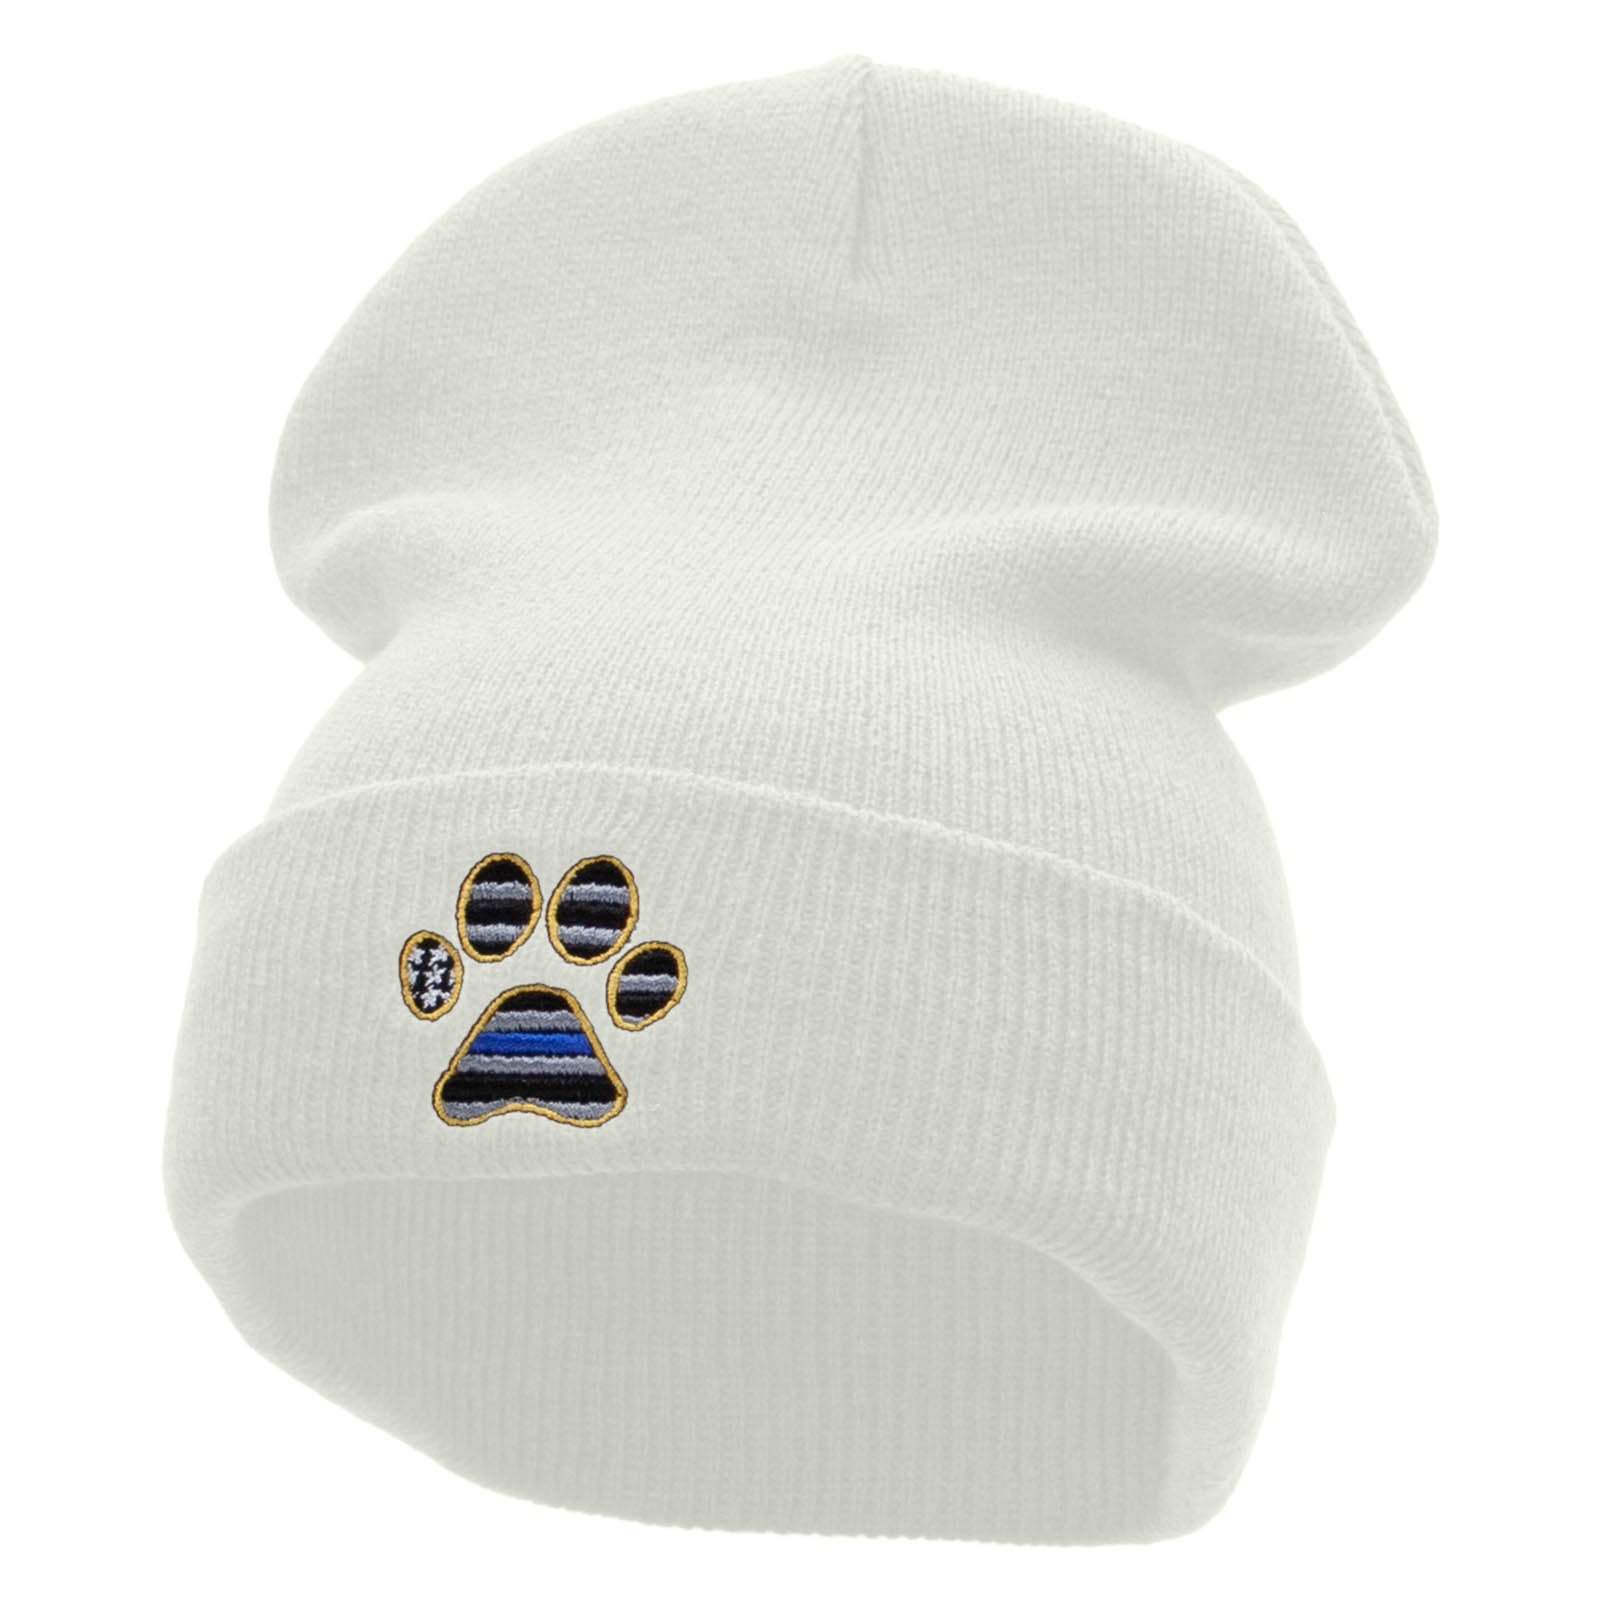 Paw Police Embroidered 12 Inch Solid Long Beanie Made in USA - White OSFM